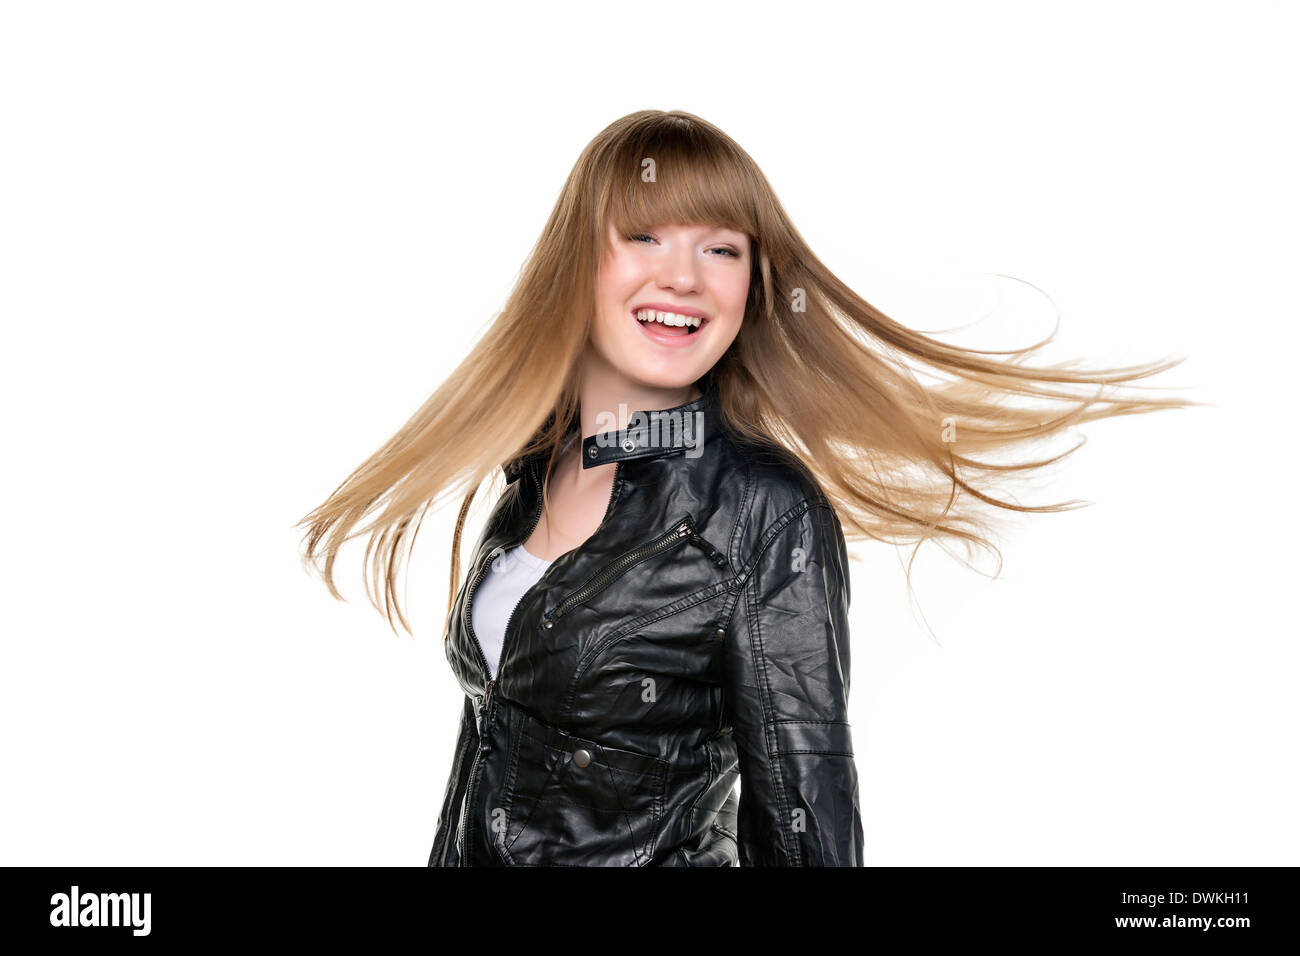 Blond girl with a black leather jacket and waving blond hair Stock Photo